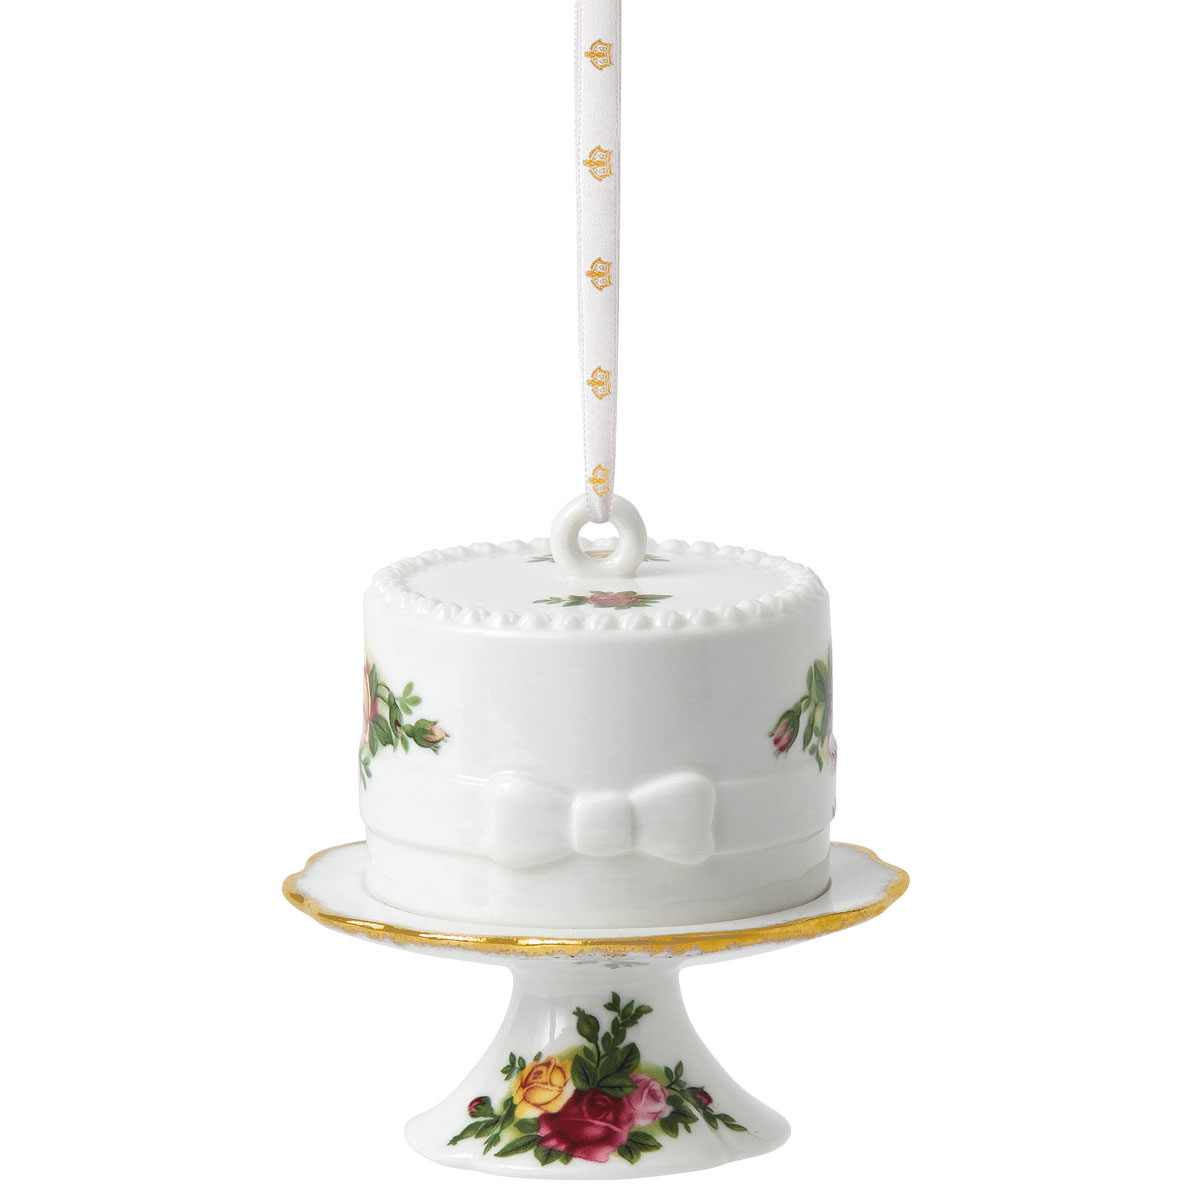 Royal Albert Old Country Roses Cake with Cake Stand 2018 Ornament